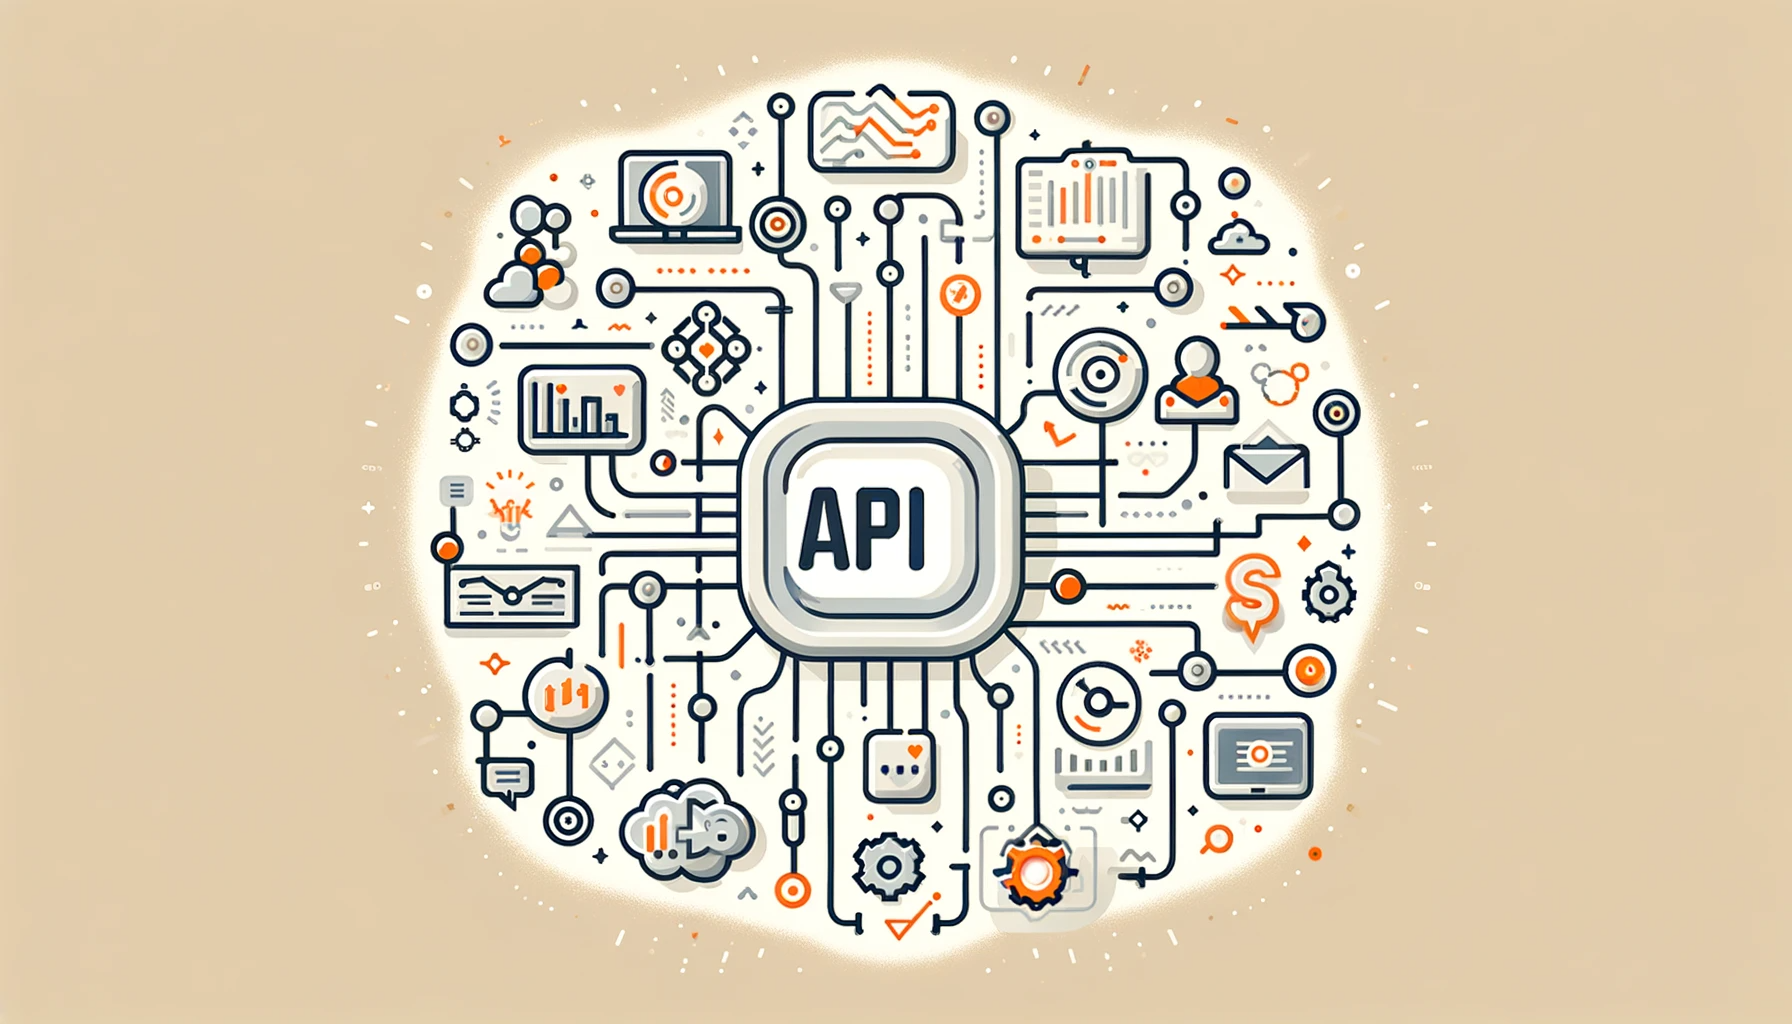 DALL·E 2023-11-24 16.49.44 - Create a minimalistic featured image for a blog article discussing the advantages of using Hubspots API for process automation and marketing strategy